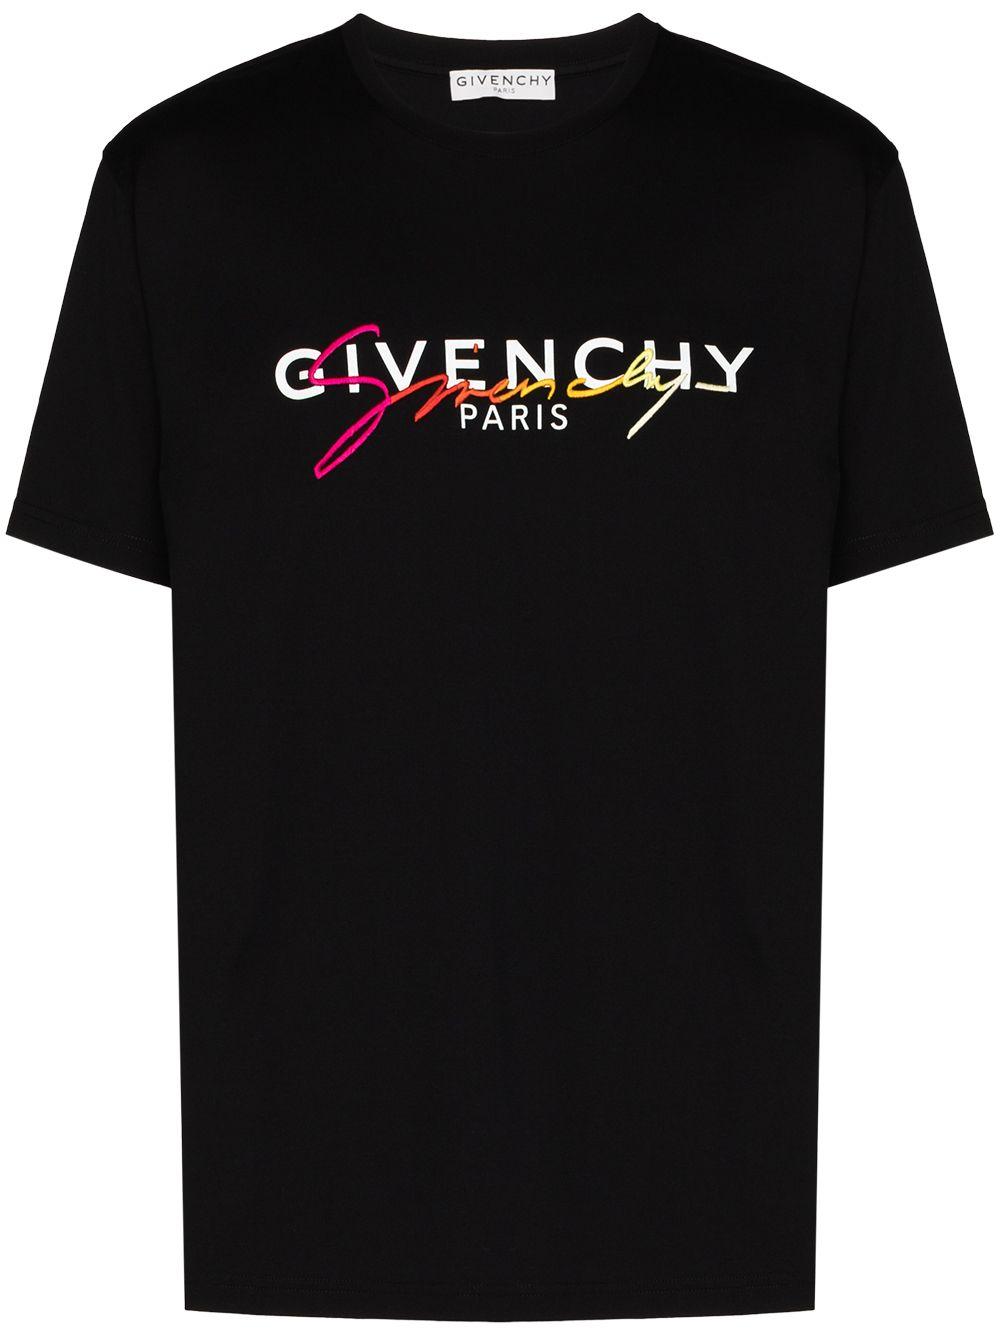 Givenchy Synthetic Logo Print T-shirt in Black for Men - Lyst